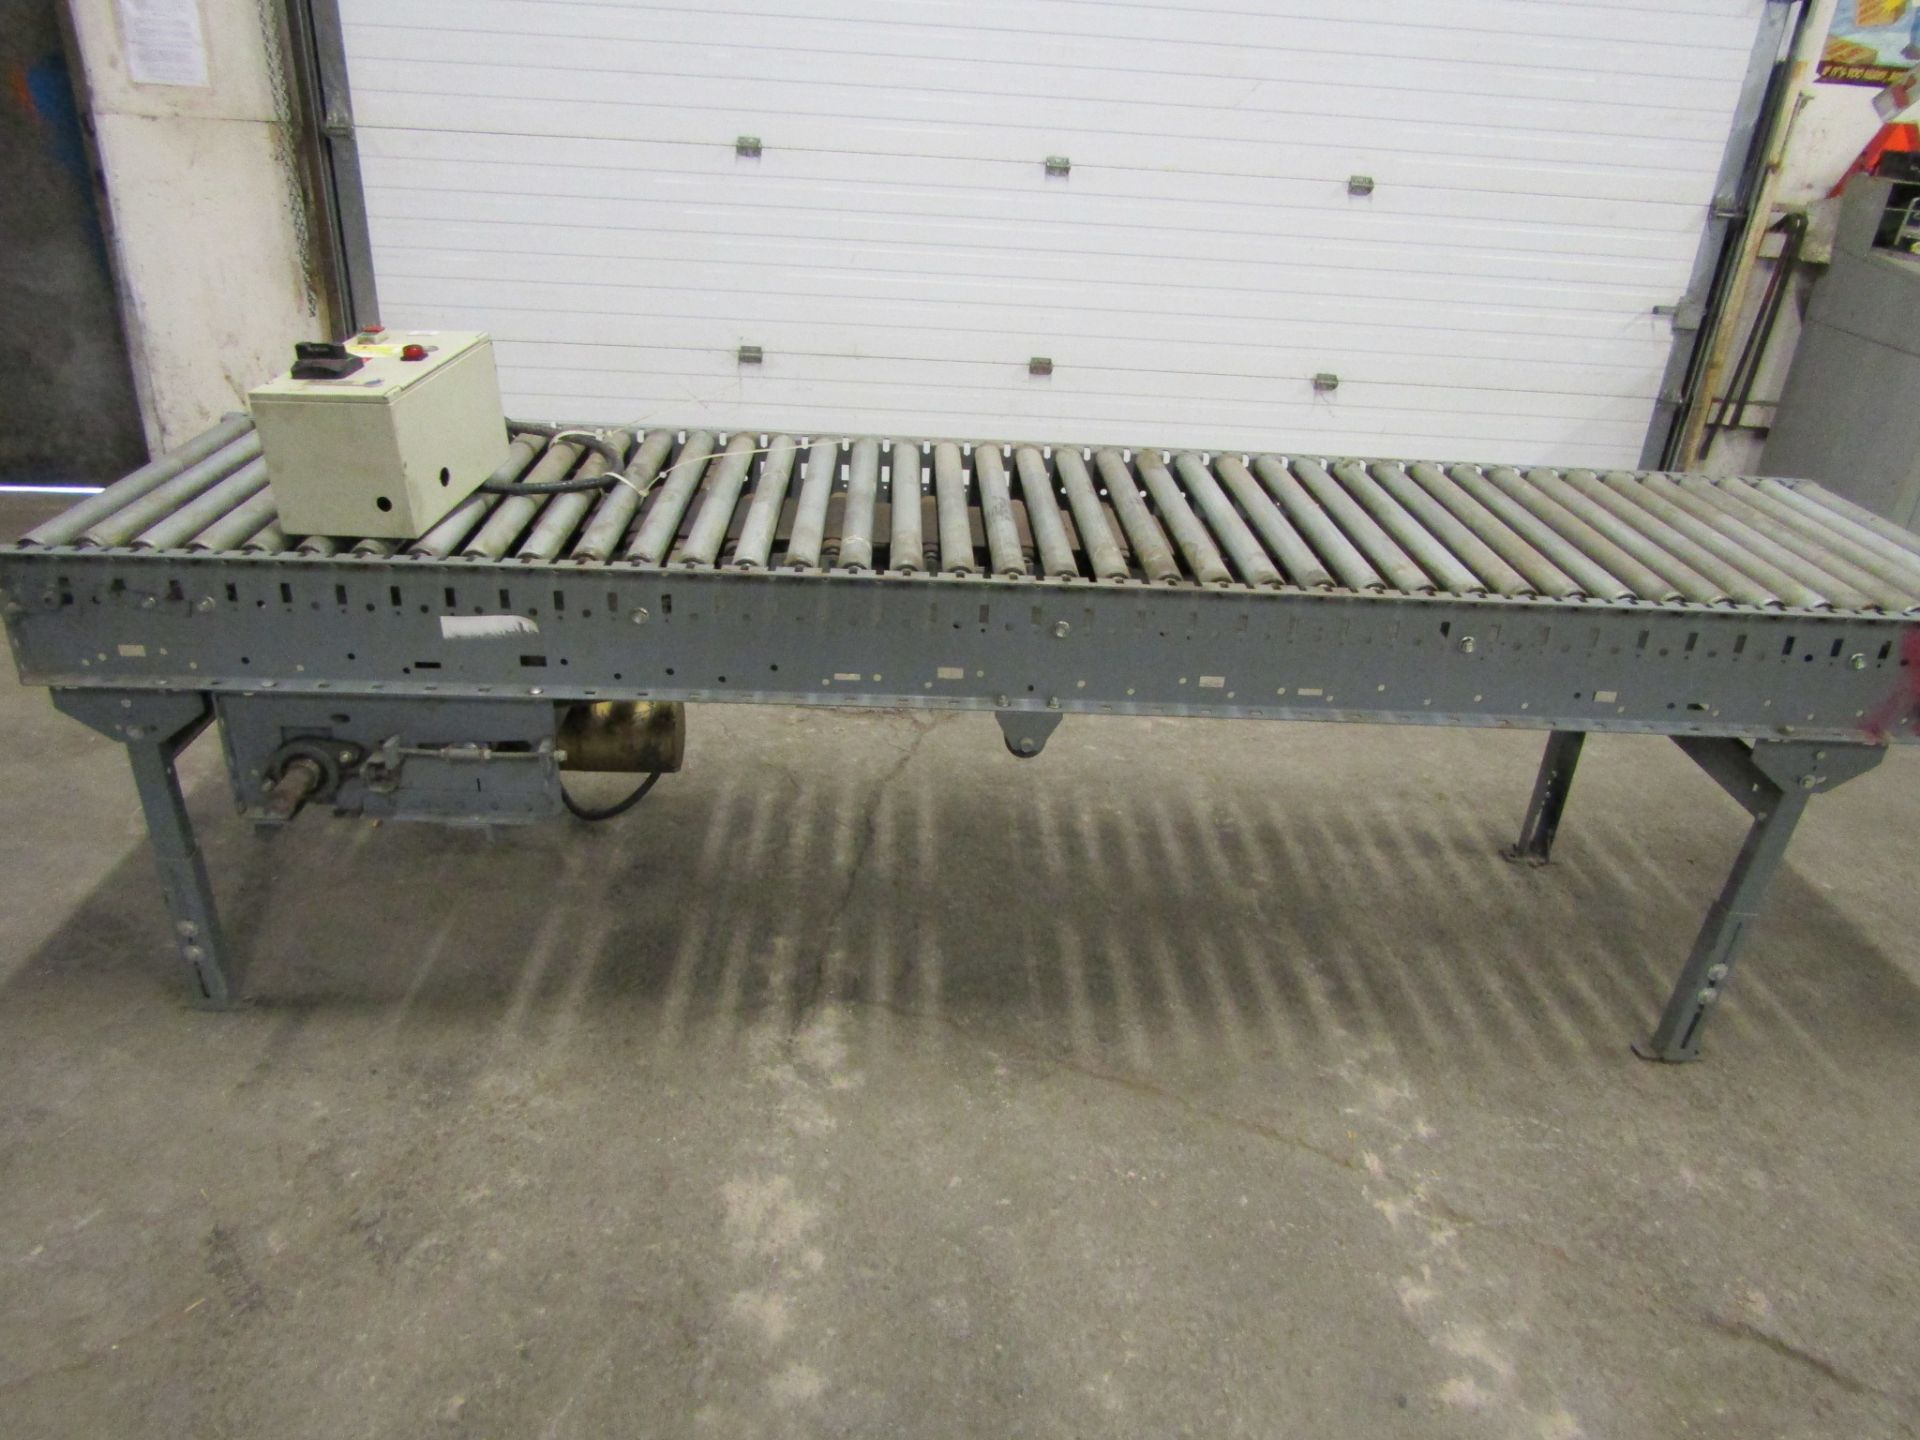 Power Conveyor System with Allen Bradley electrical control box - 10' long X 30" wide